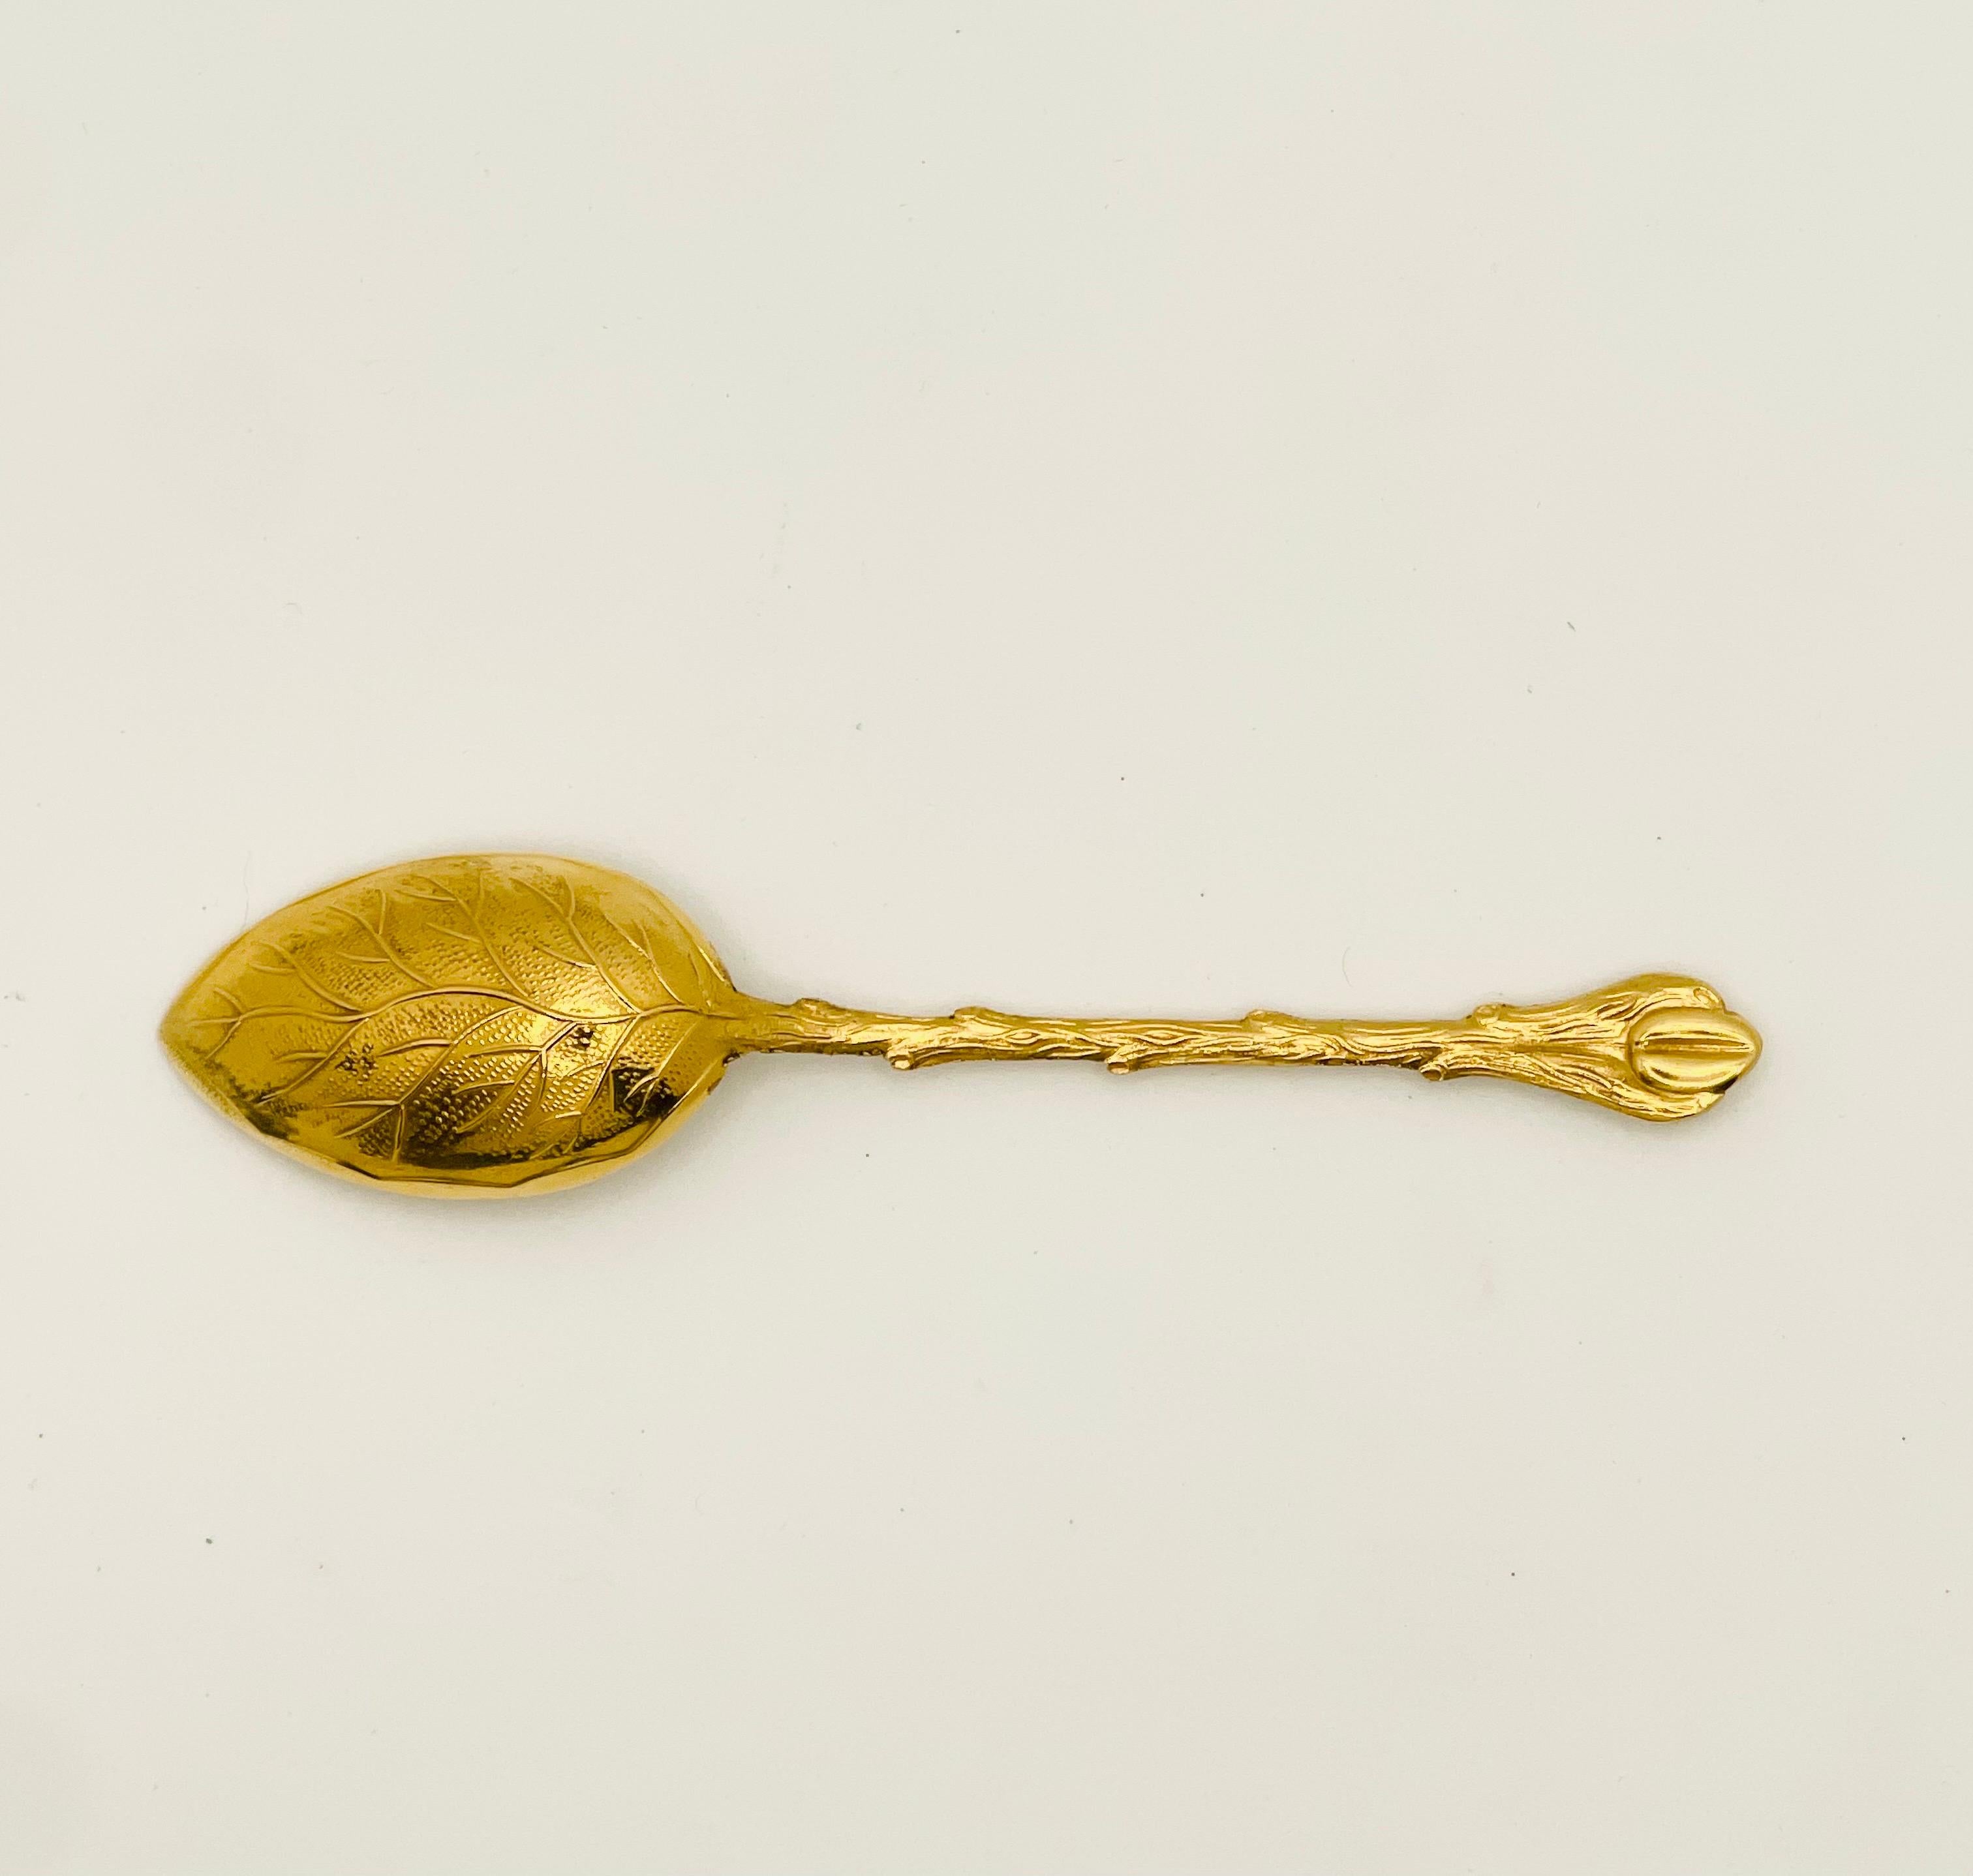 Series of 12 teaspoons in vermeil (silver plated with gold), from Saint Médard goldsmiths in France, in its original case.
Note a delicate foliage decoration on the spoons.
Each spoon measures 10.5 cm by 1.4 cm for a weight of 14 grams.
All of the